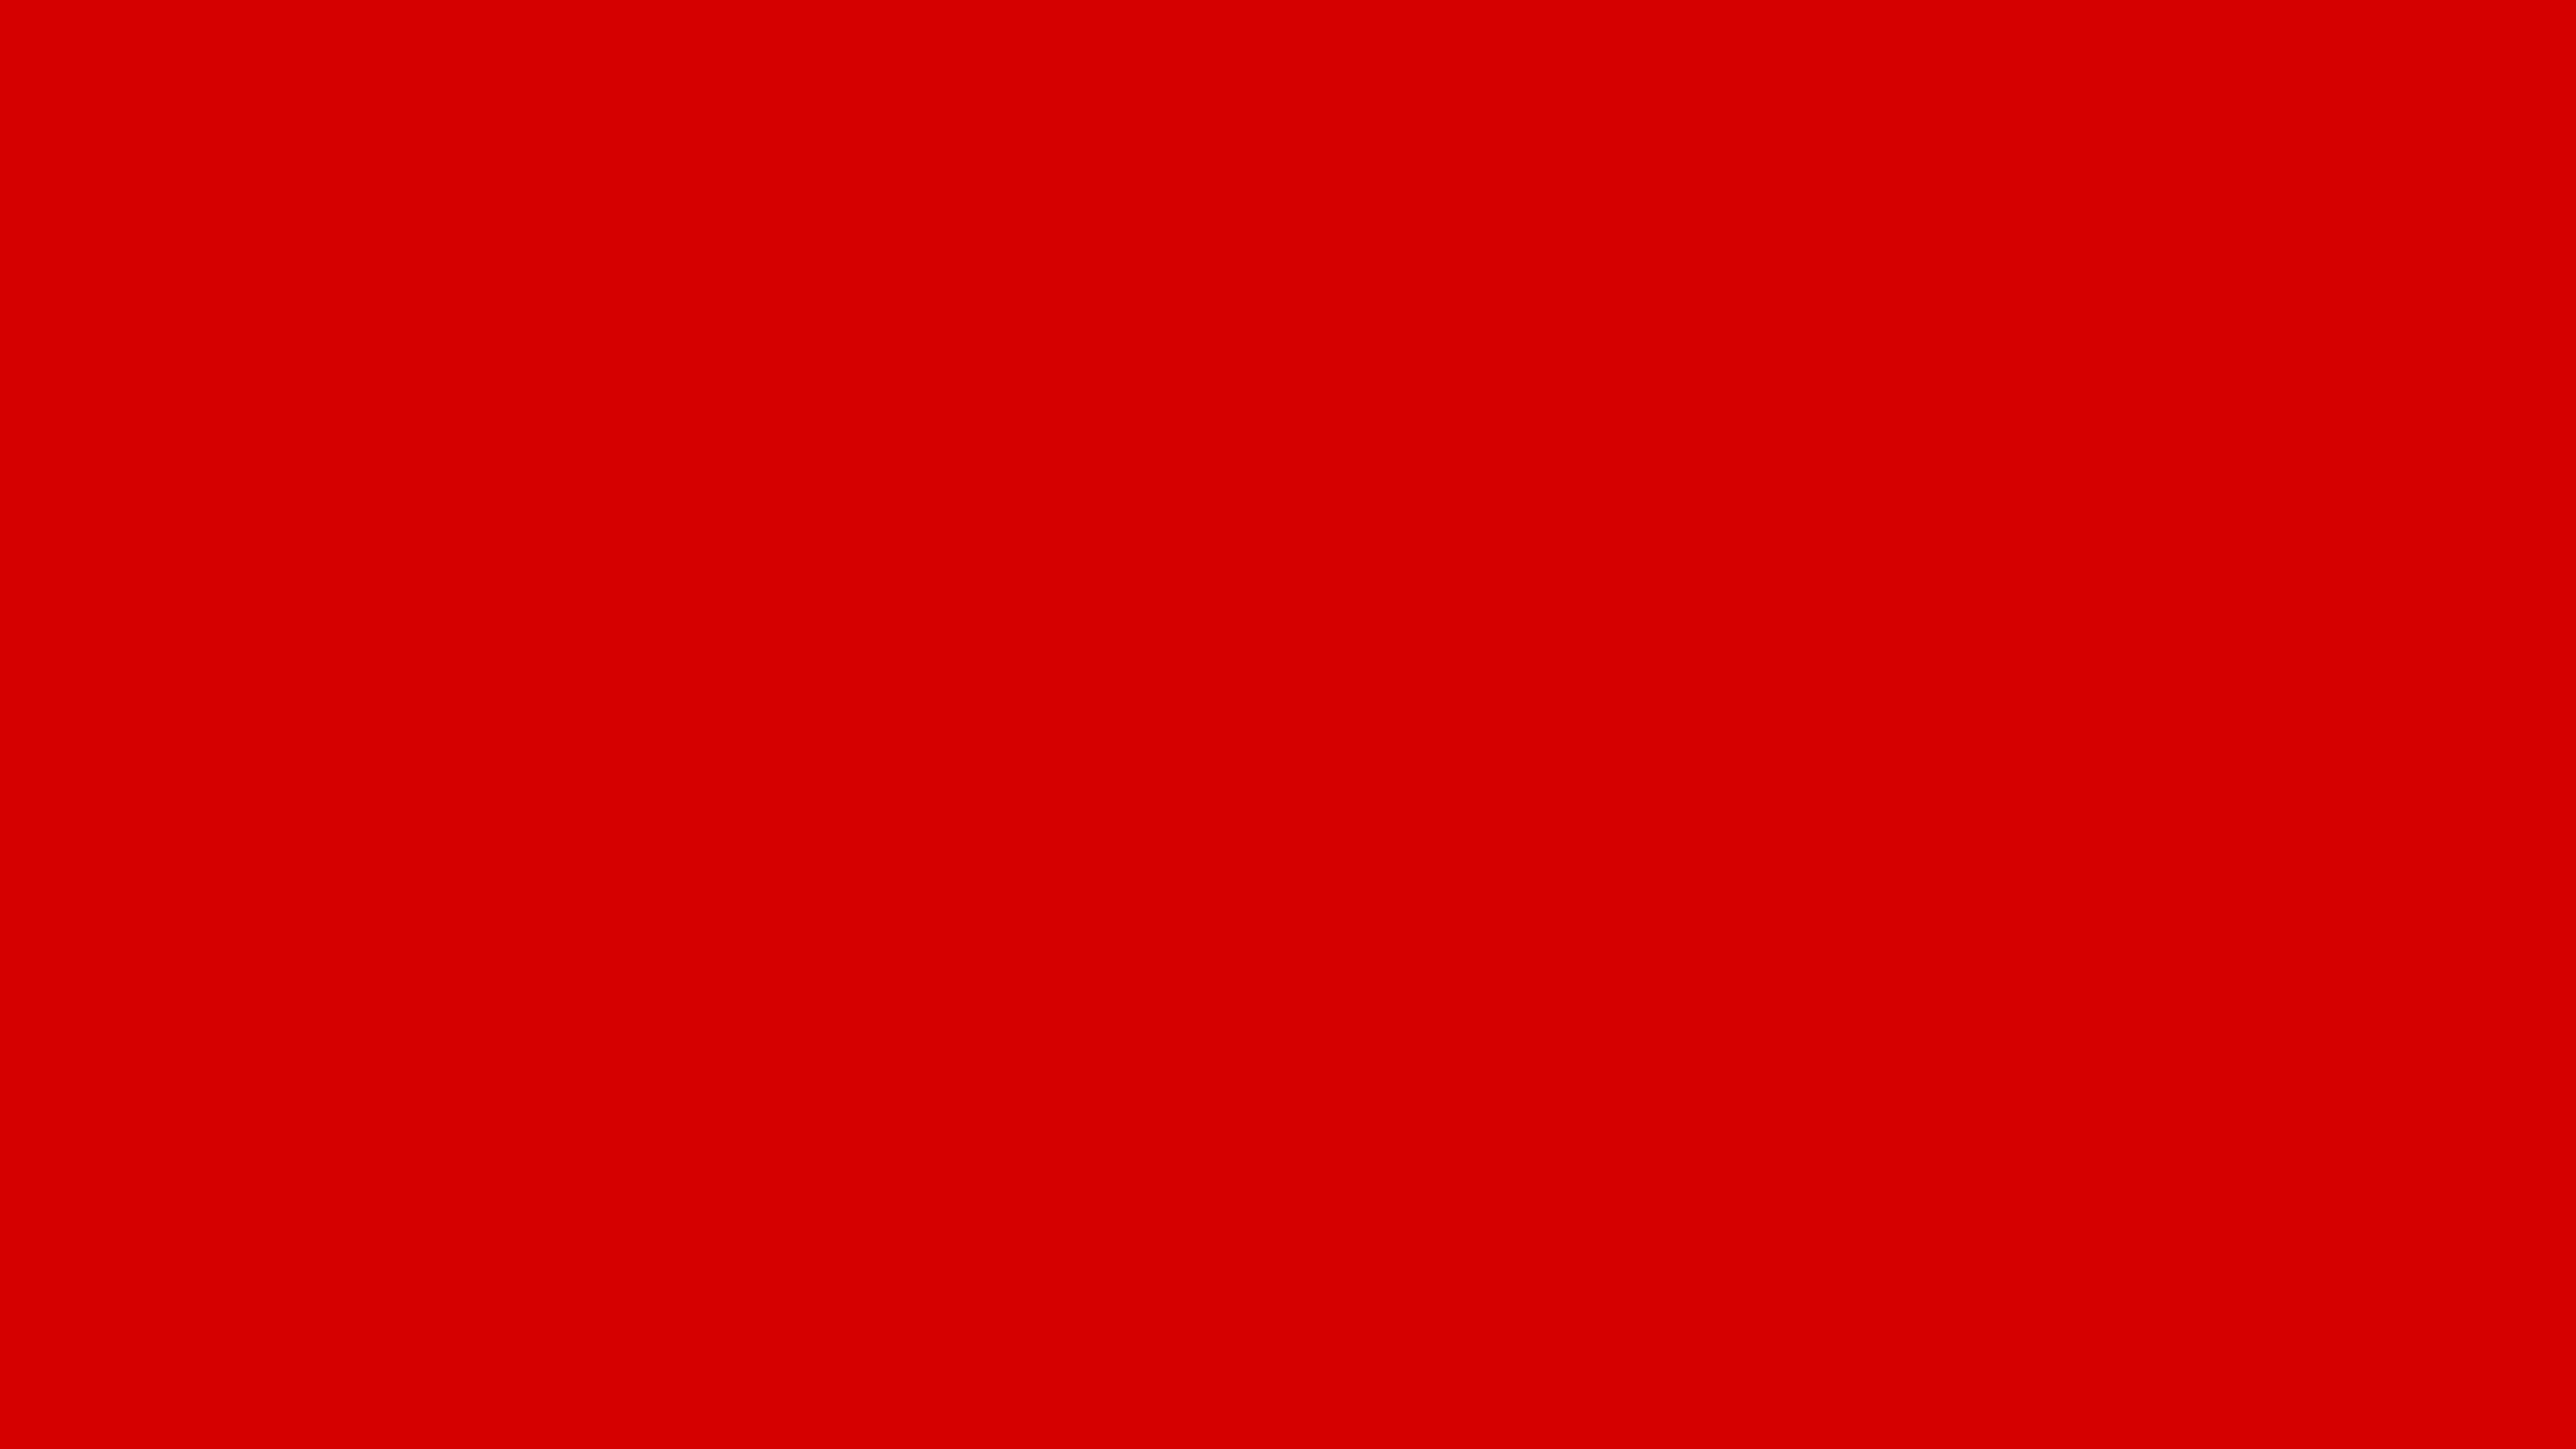 7680x4320 Rosso Corsa Solid Color Background